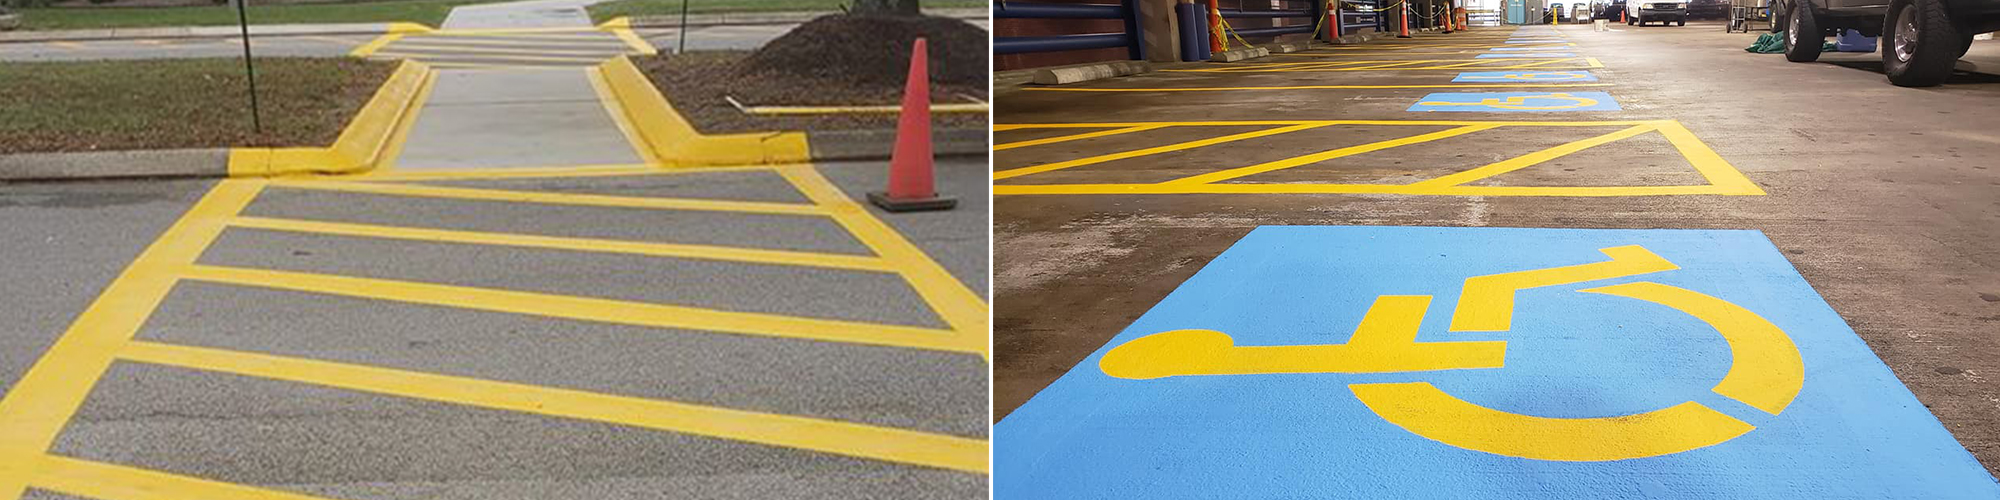 Parking Lot Maintenance in Chattanooga, TN